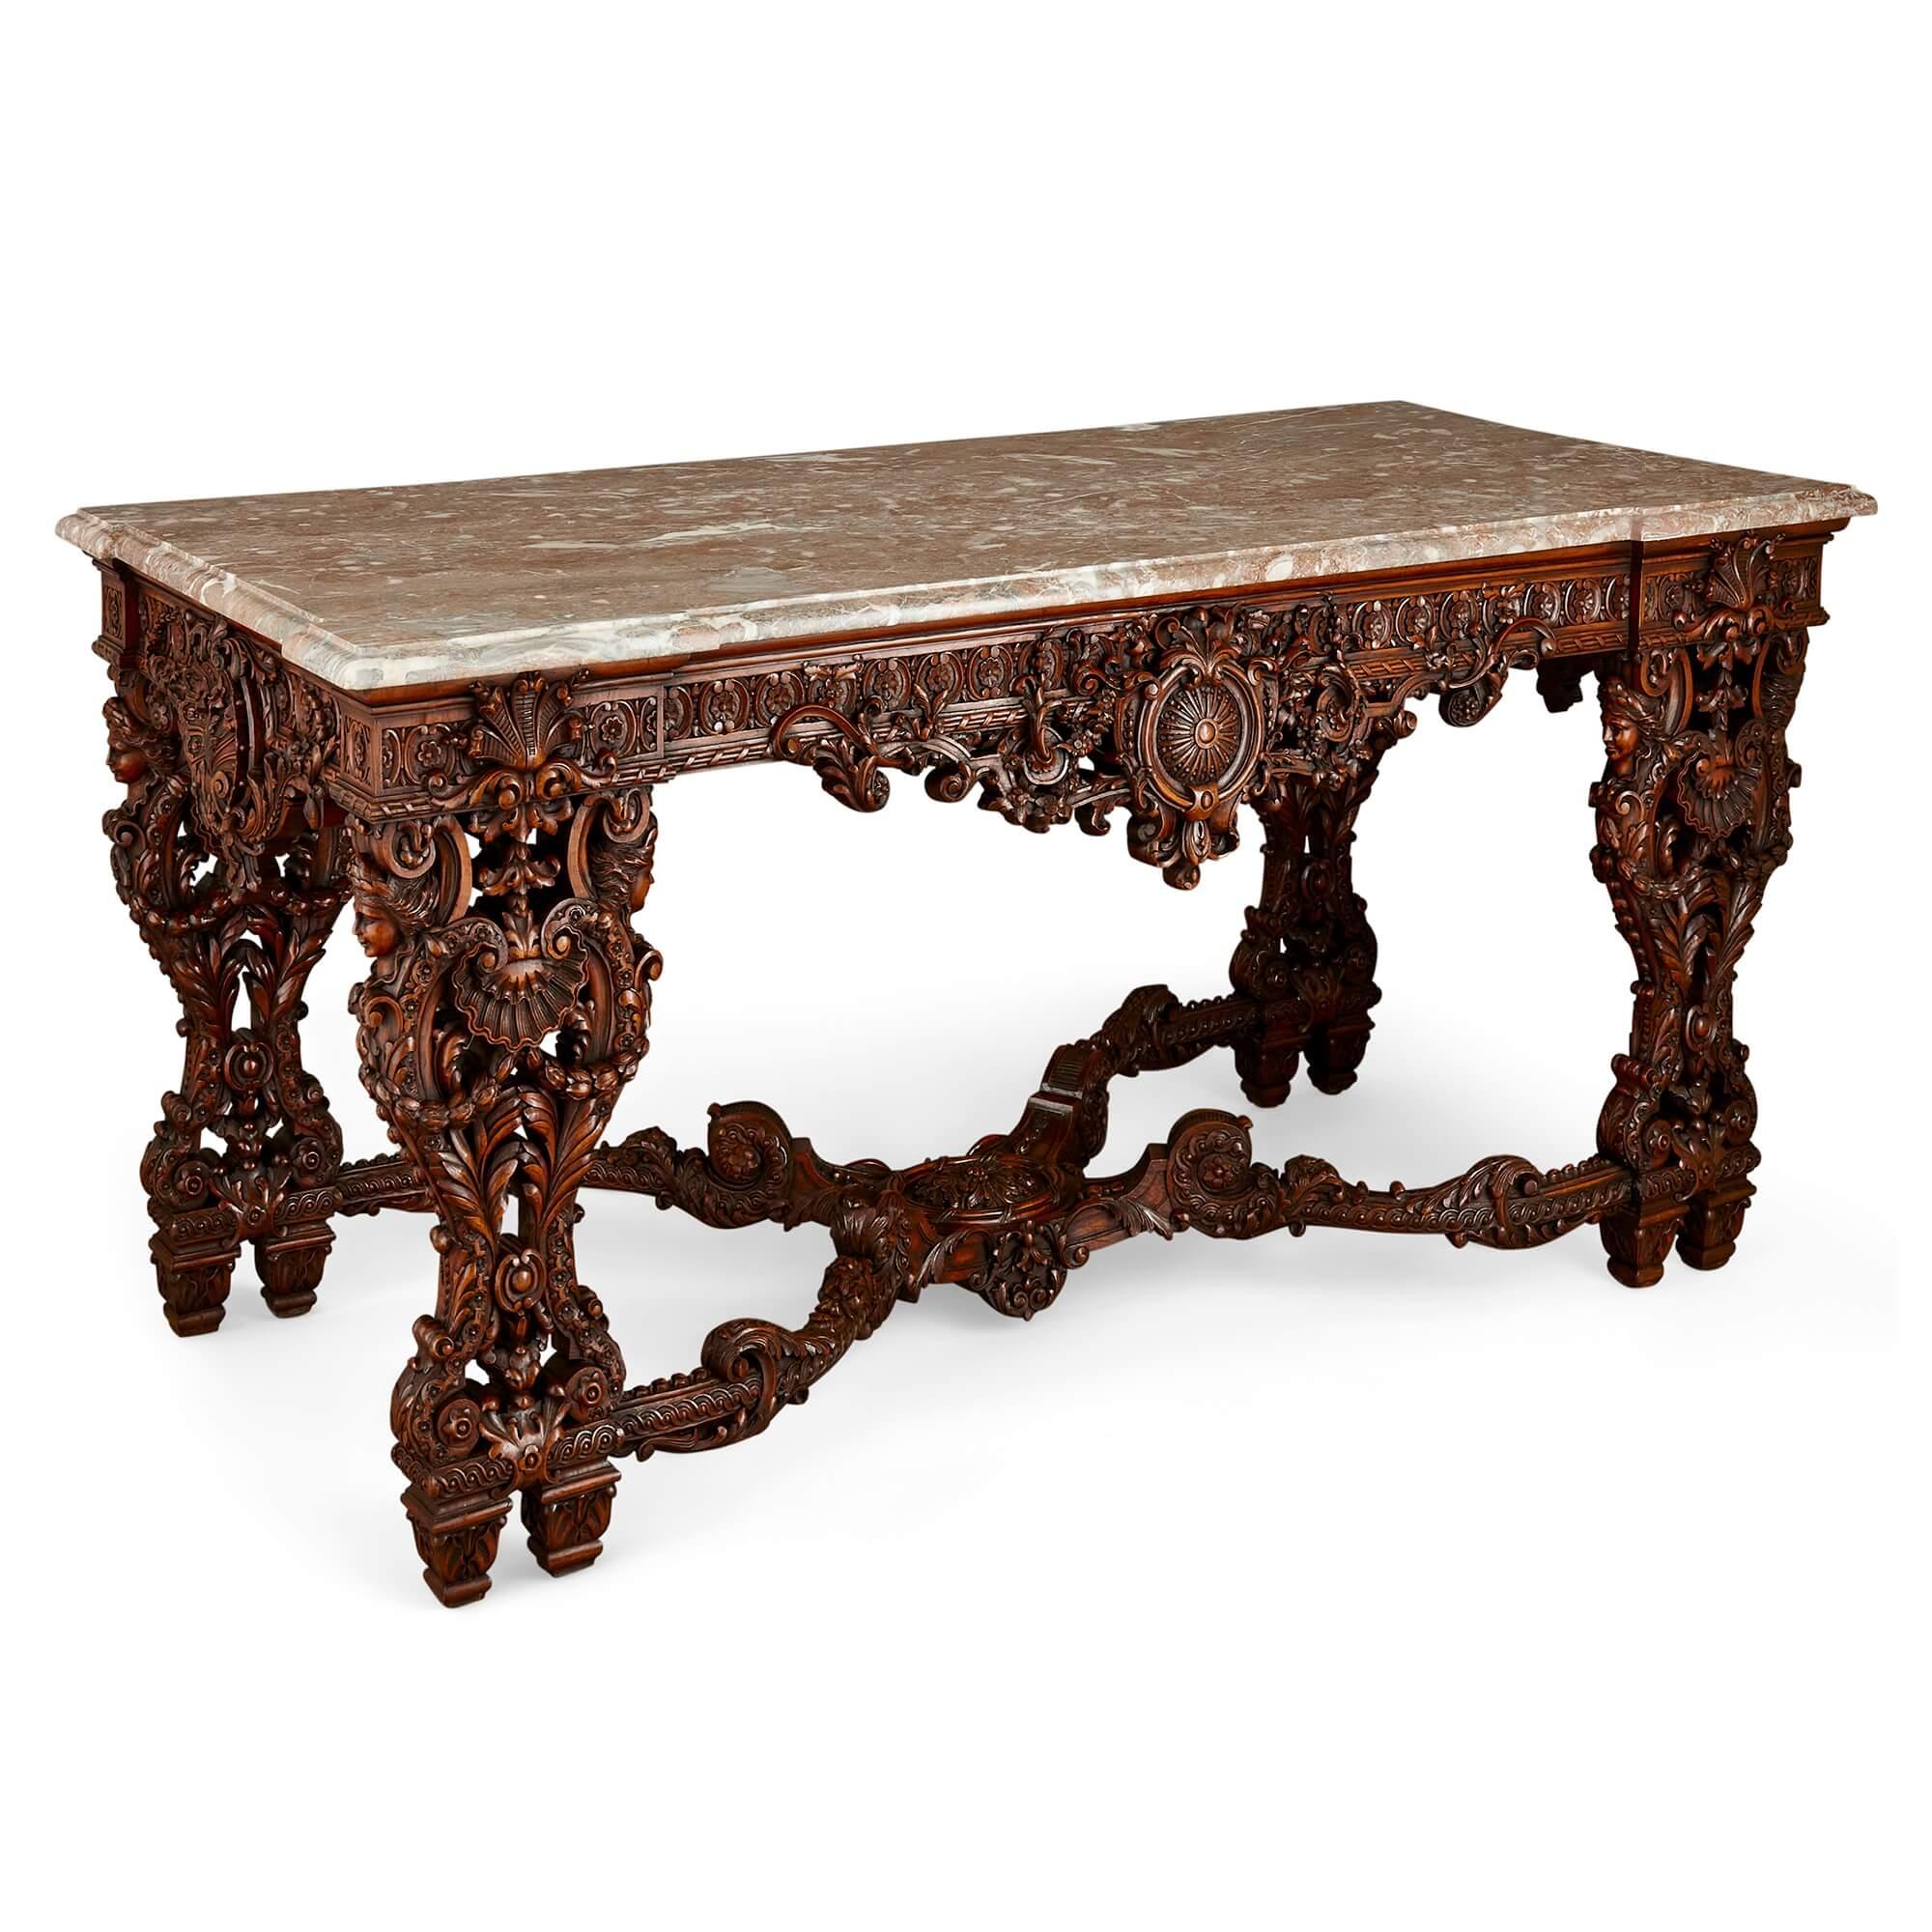 Large Regence Style Mahogany Centre Table with Marble Top
French, Late 19th Century
Height 82cm, width 176cm, depth 81cm

With an exceptionally intricate and ornate carved mahogany structure, this beautiful table, topped with grey and pink marble,